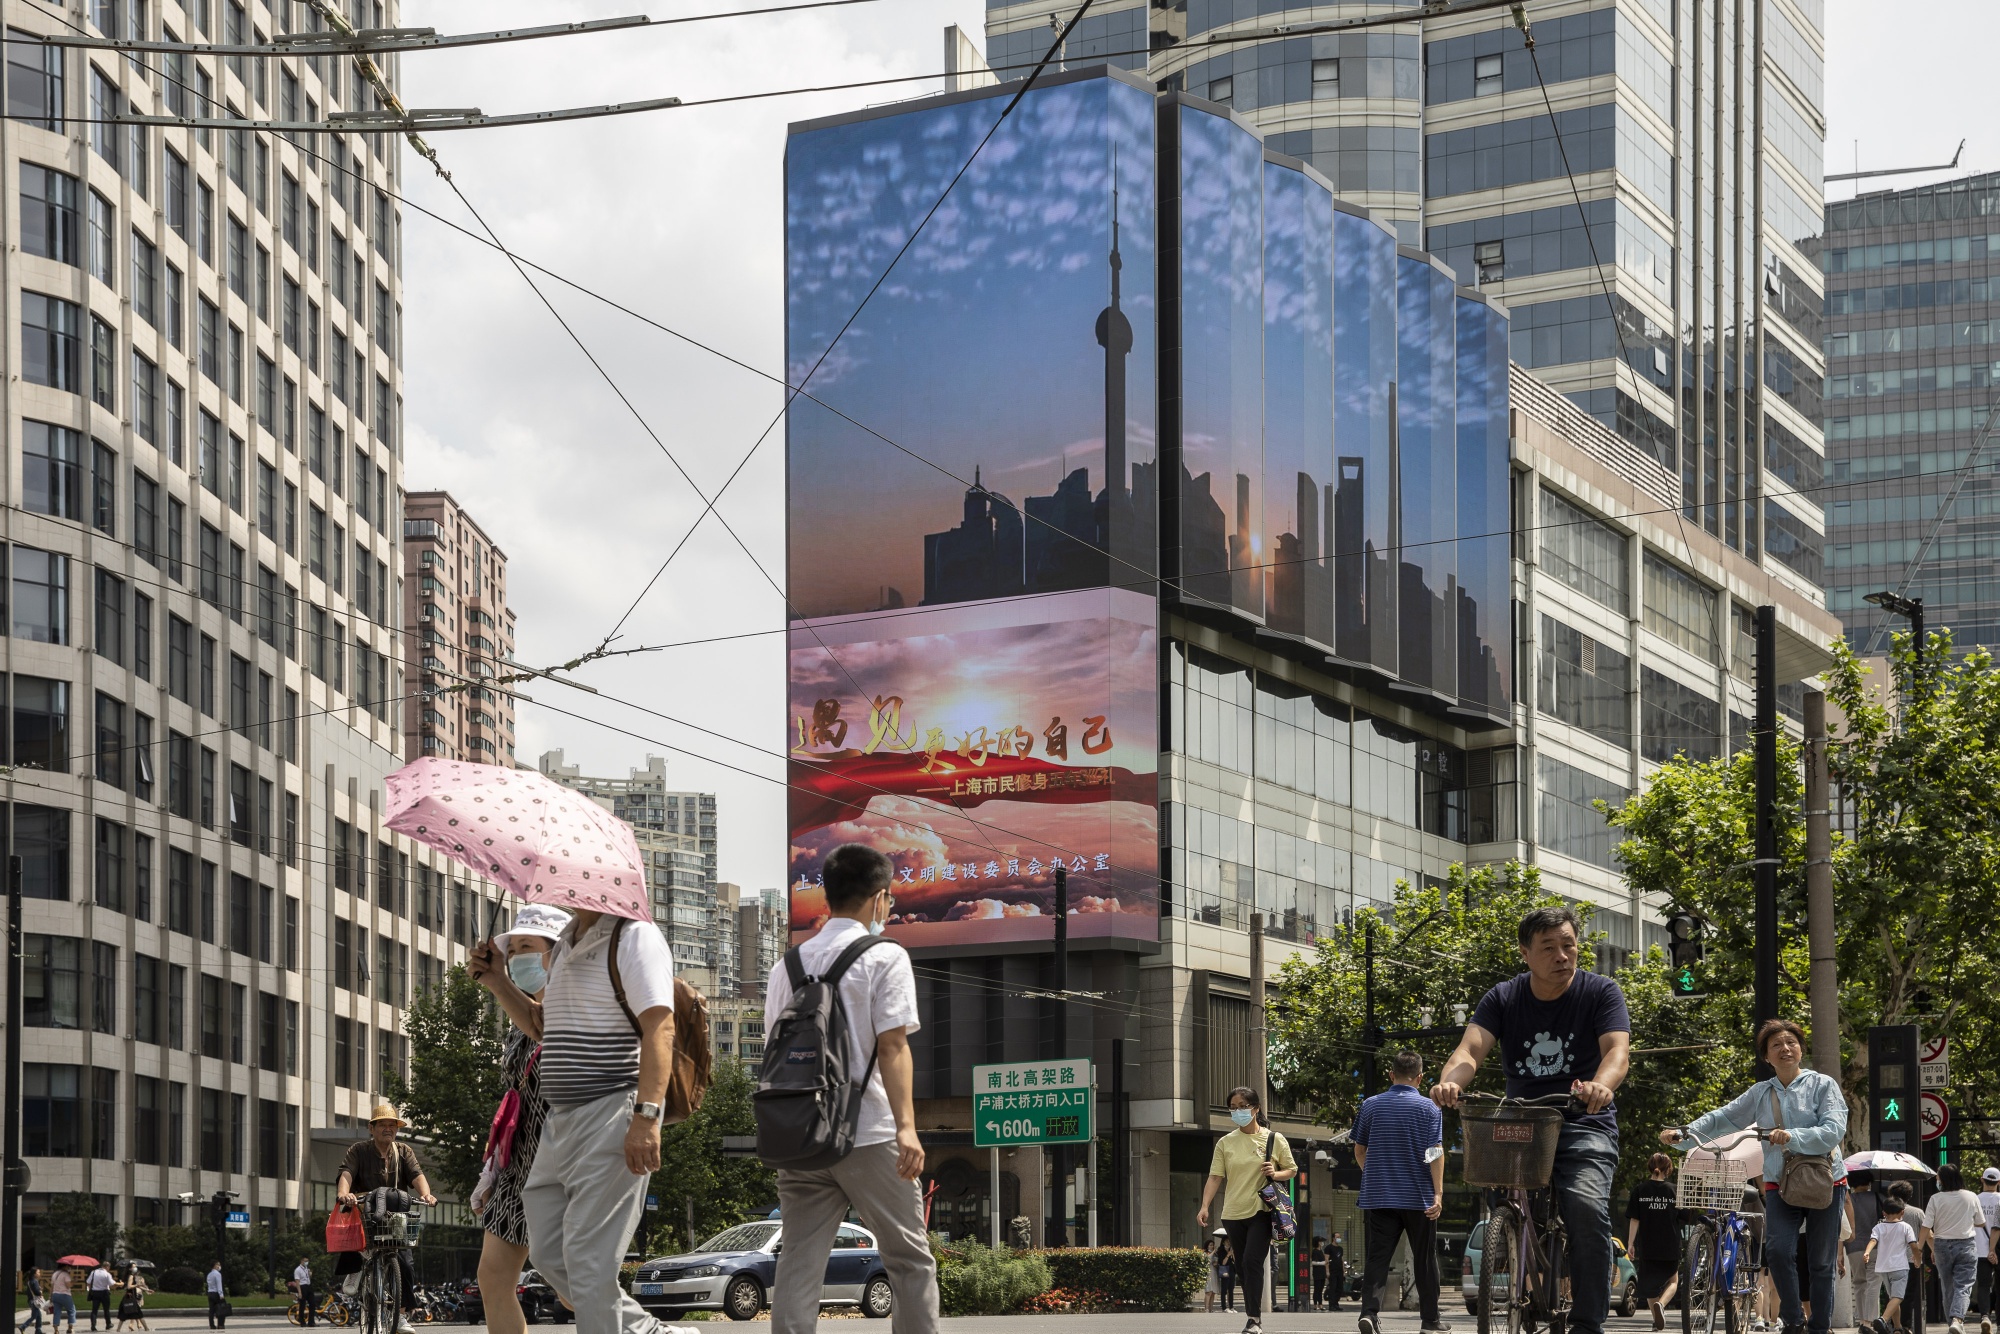 A public screen with an image of the Shanghai city skyline in Shanghai, China.